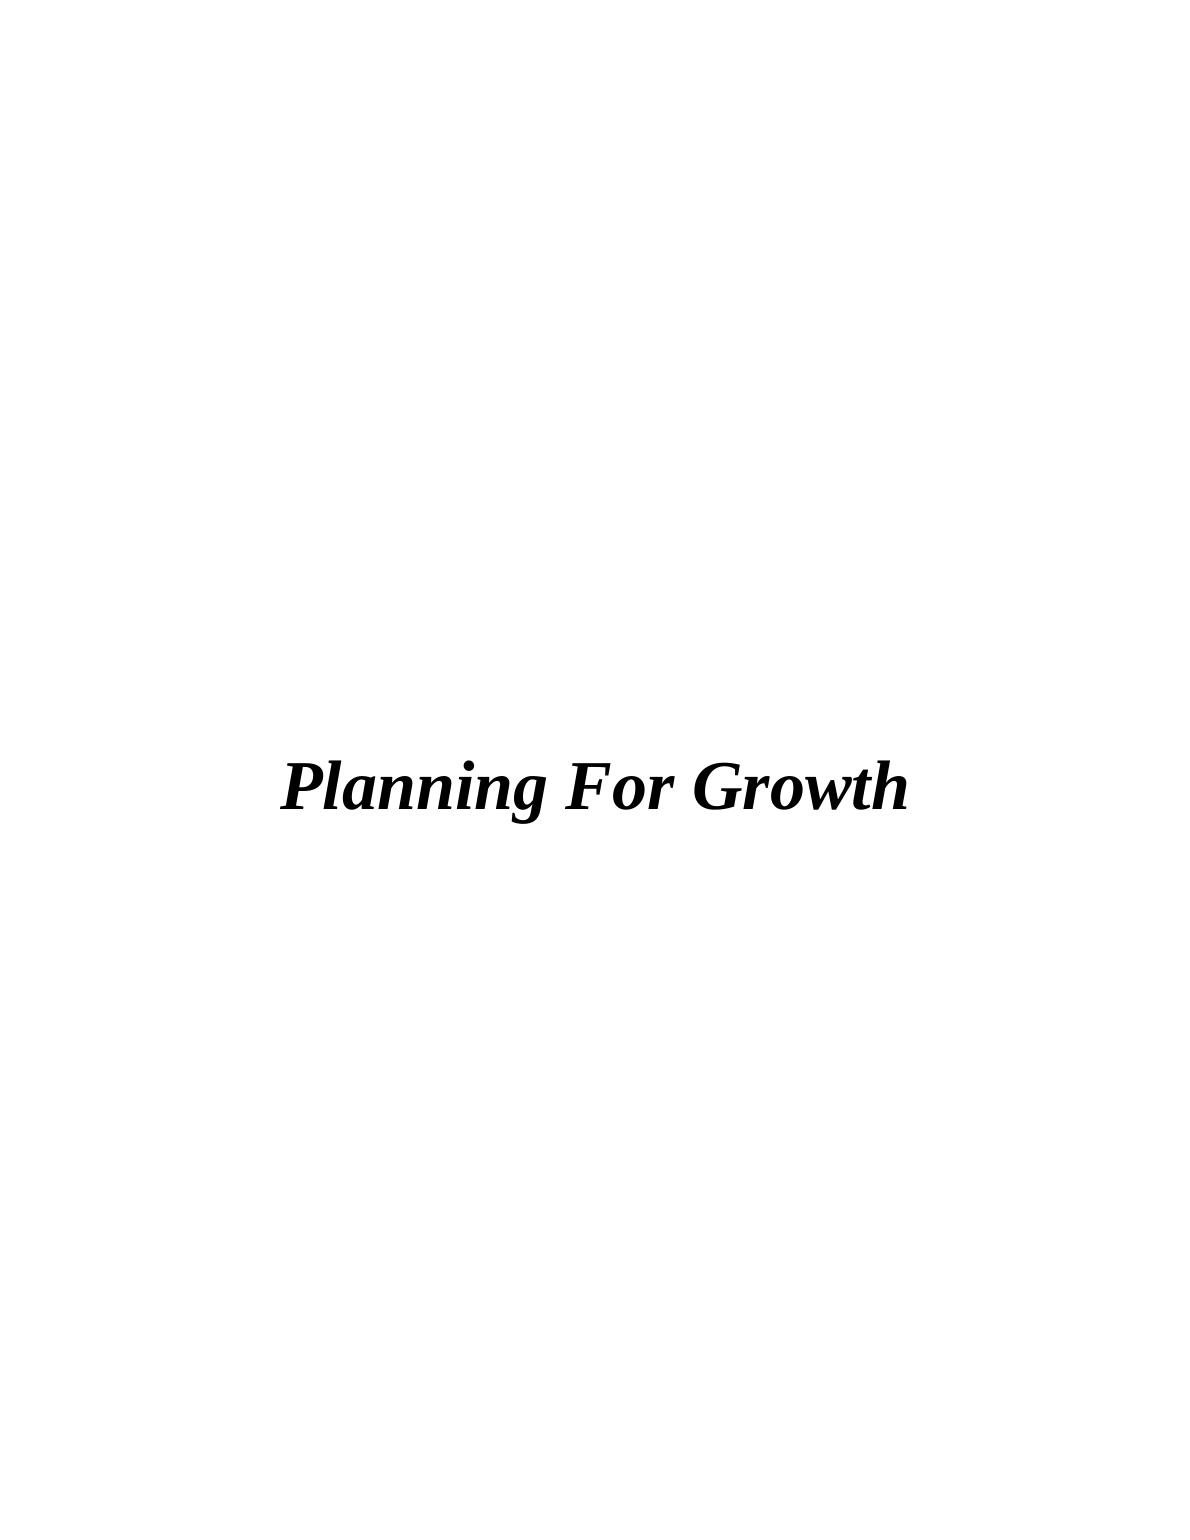 Planning For Growth INTRODUCTION 1 TASK 11 P1 Key considerations for evaluating opportunities for growth of business_1